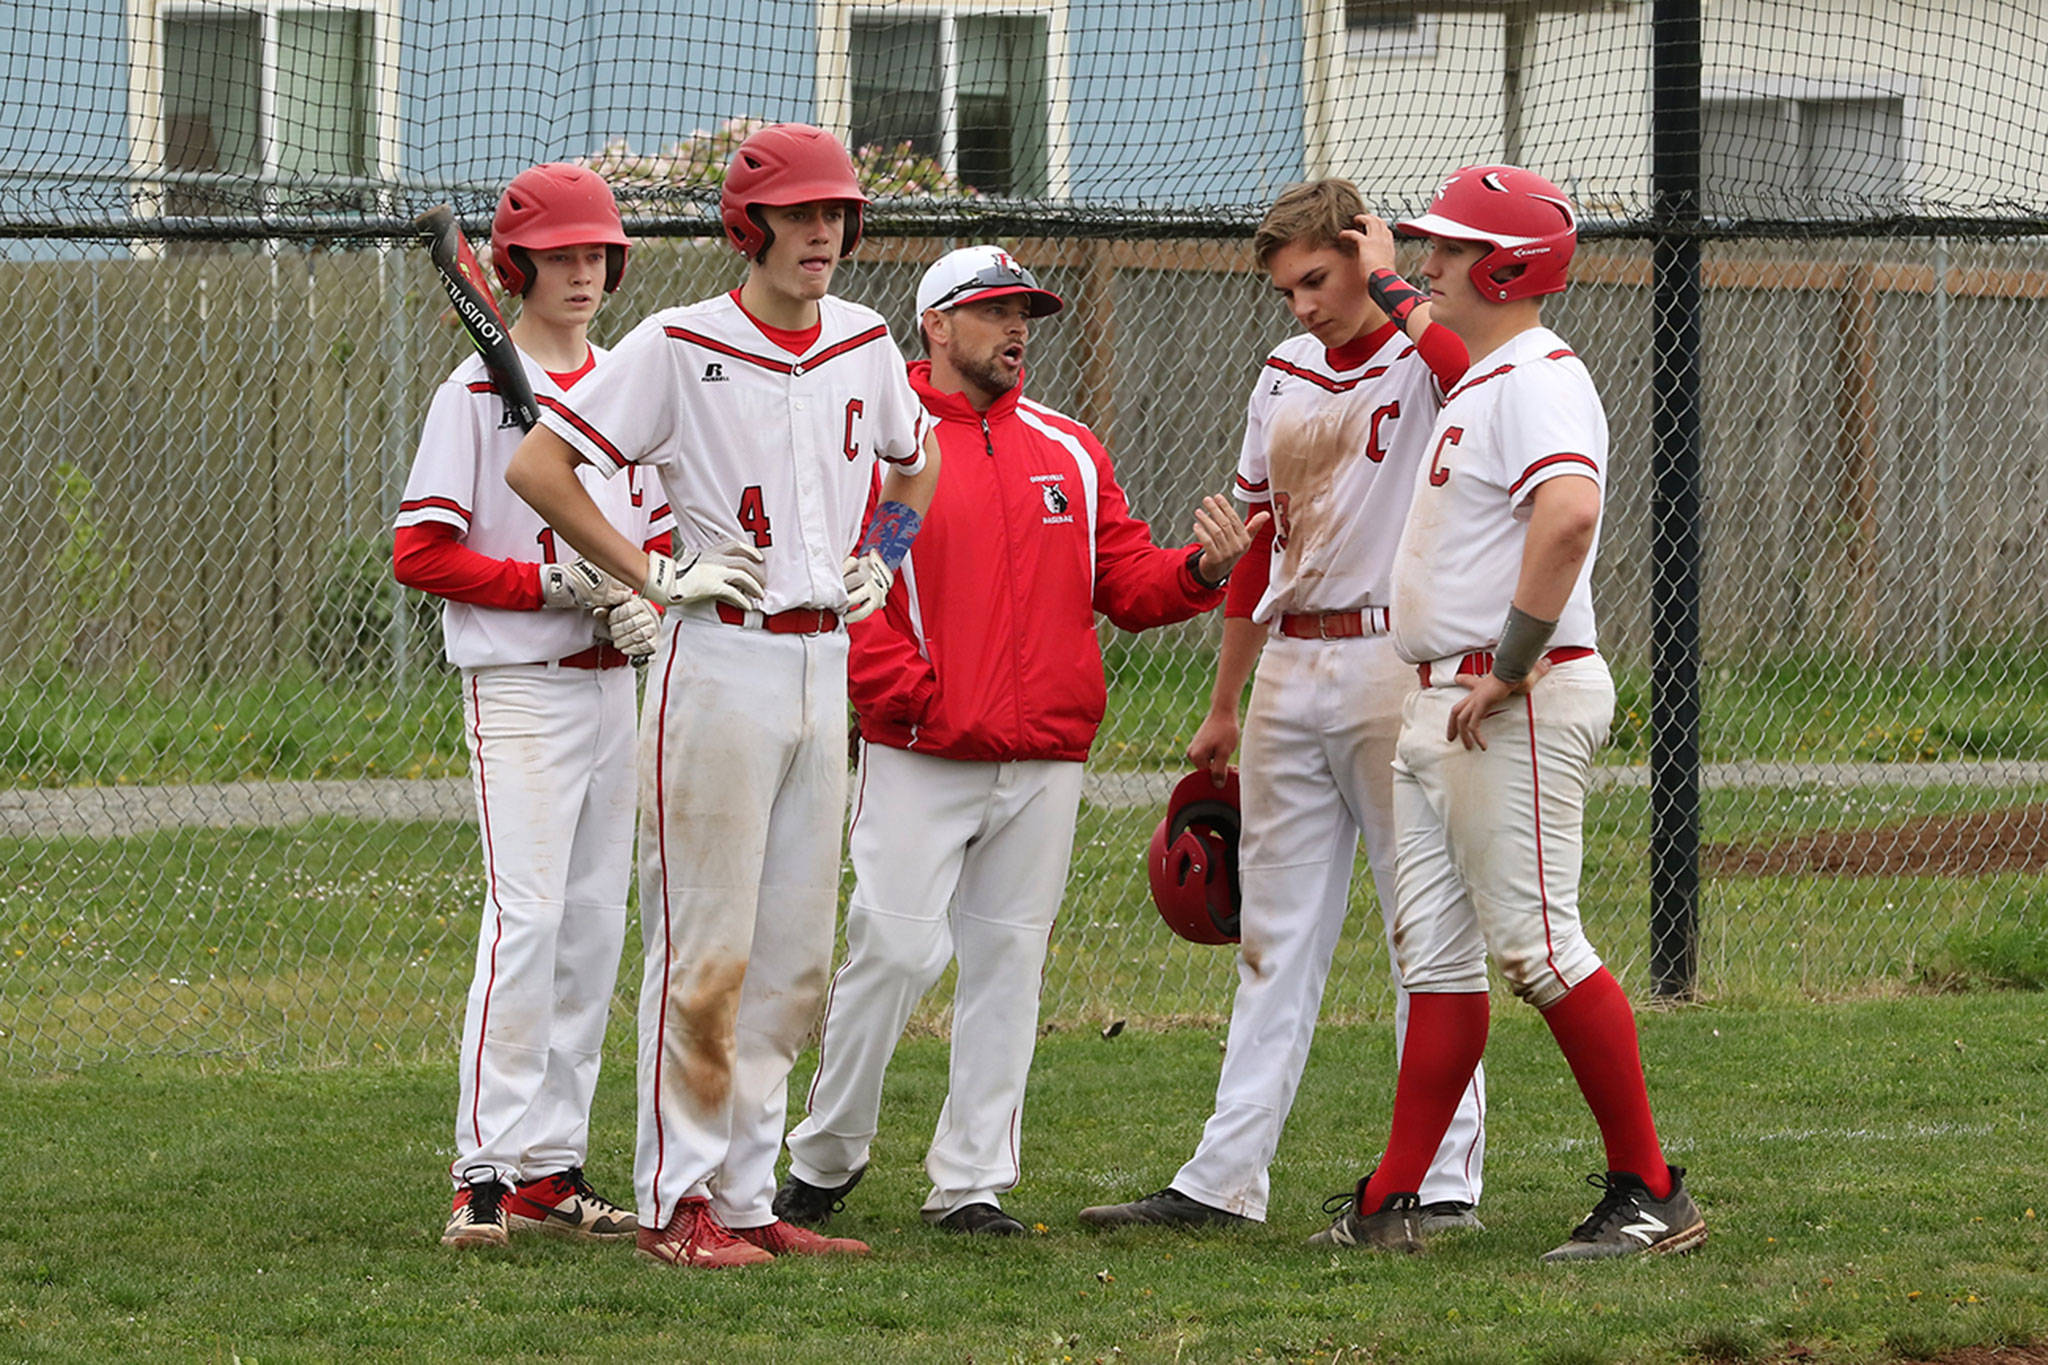 Coupeville coach Chris Smith, center, confers with his offense during a Granite Falls time out. From the left are Daniel Olson, Gavin Knoblich, Jake Pease Dane Lucero.(Photo by John Fisken)